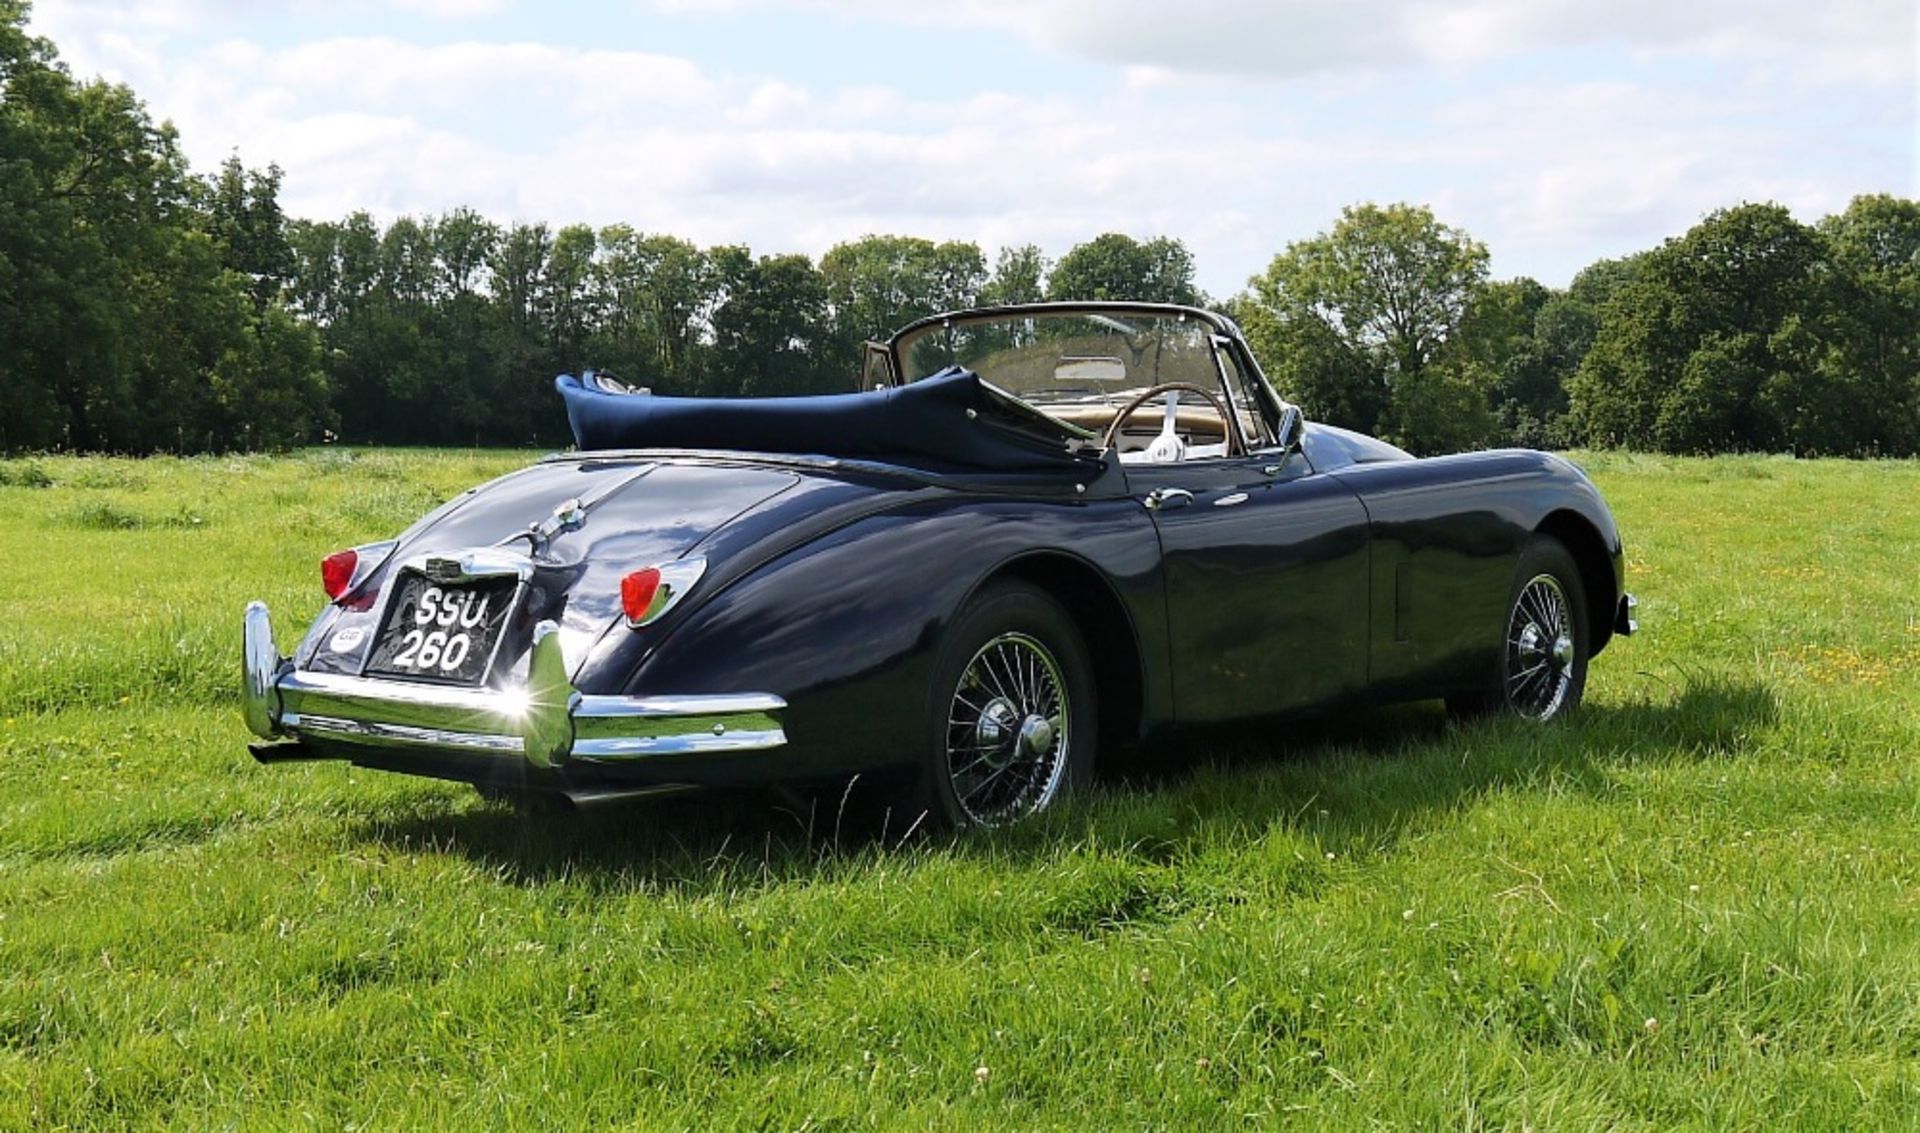 1958 JAGUAR XK150 DROPHEAD COUPE Registration Number: SSU 260 Chassis Number: S837226 Recorded - Image 9 of 26